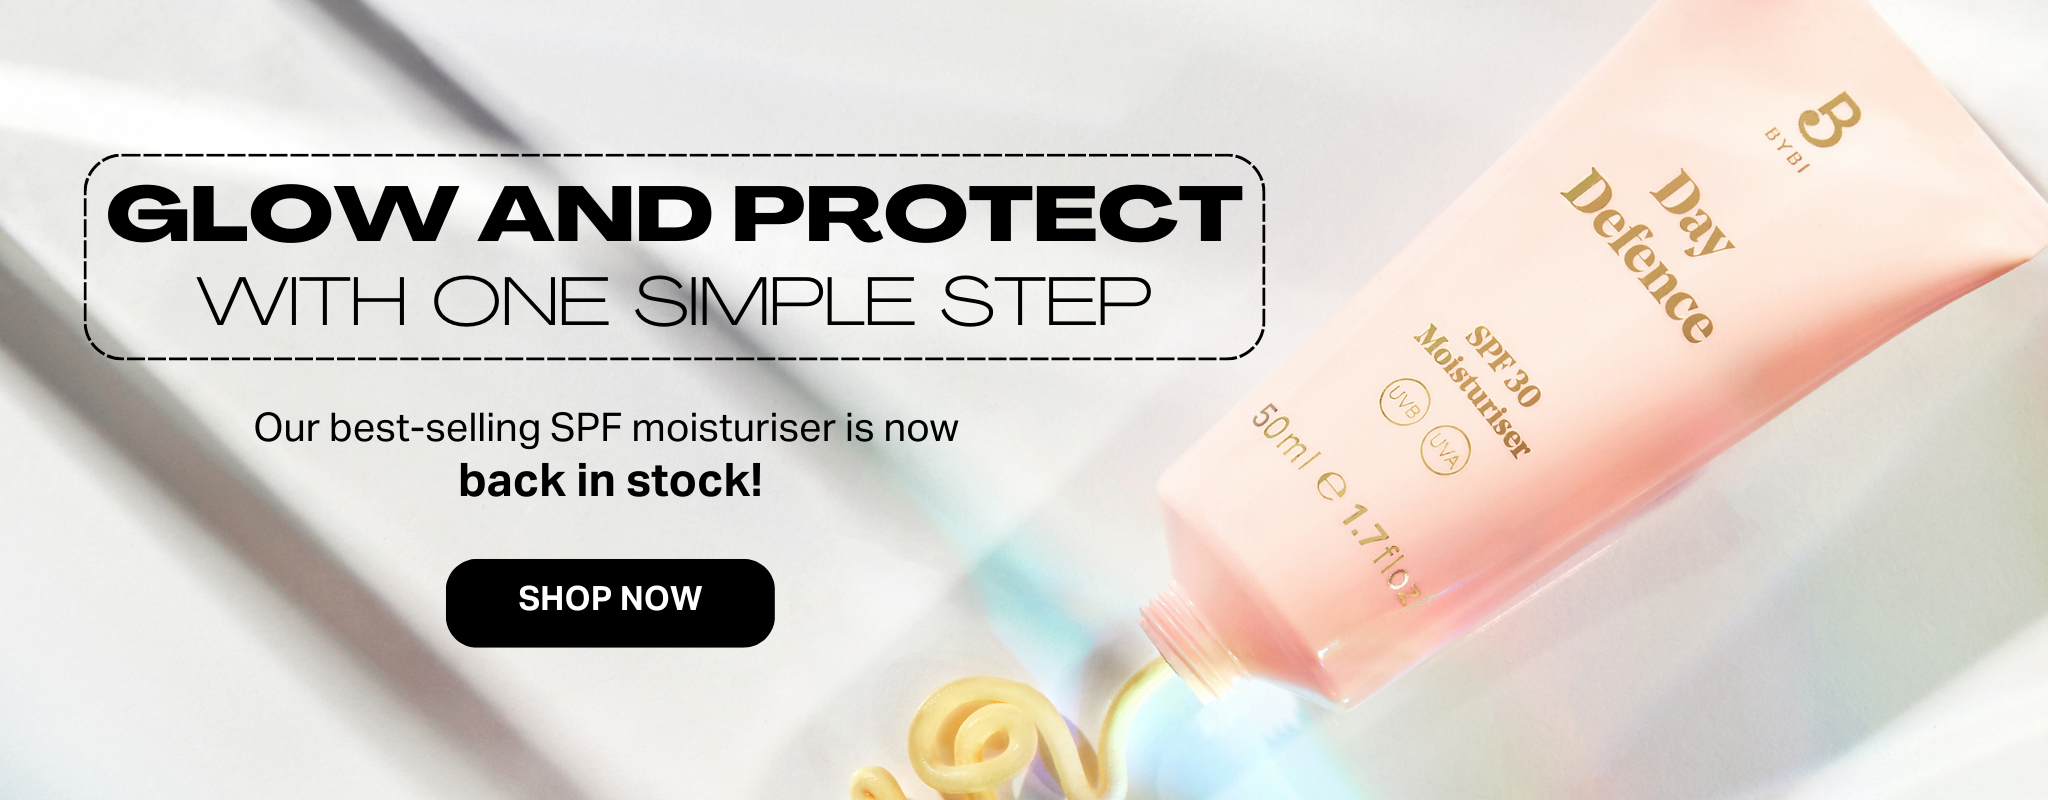 Glow and protect with one simple step